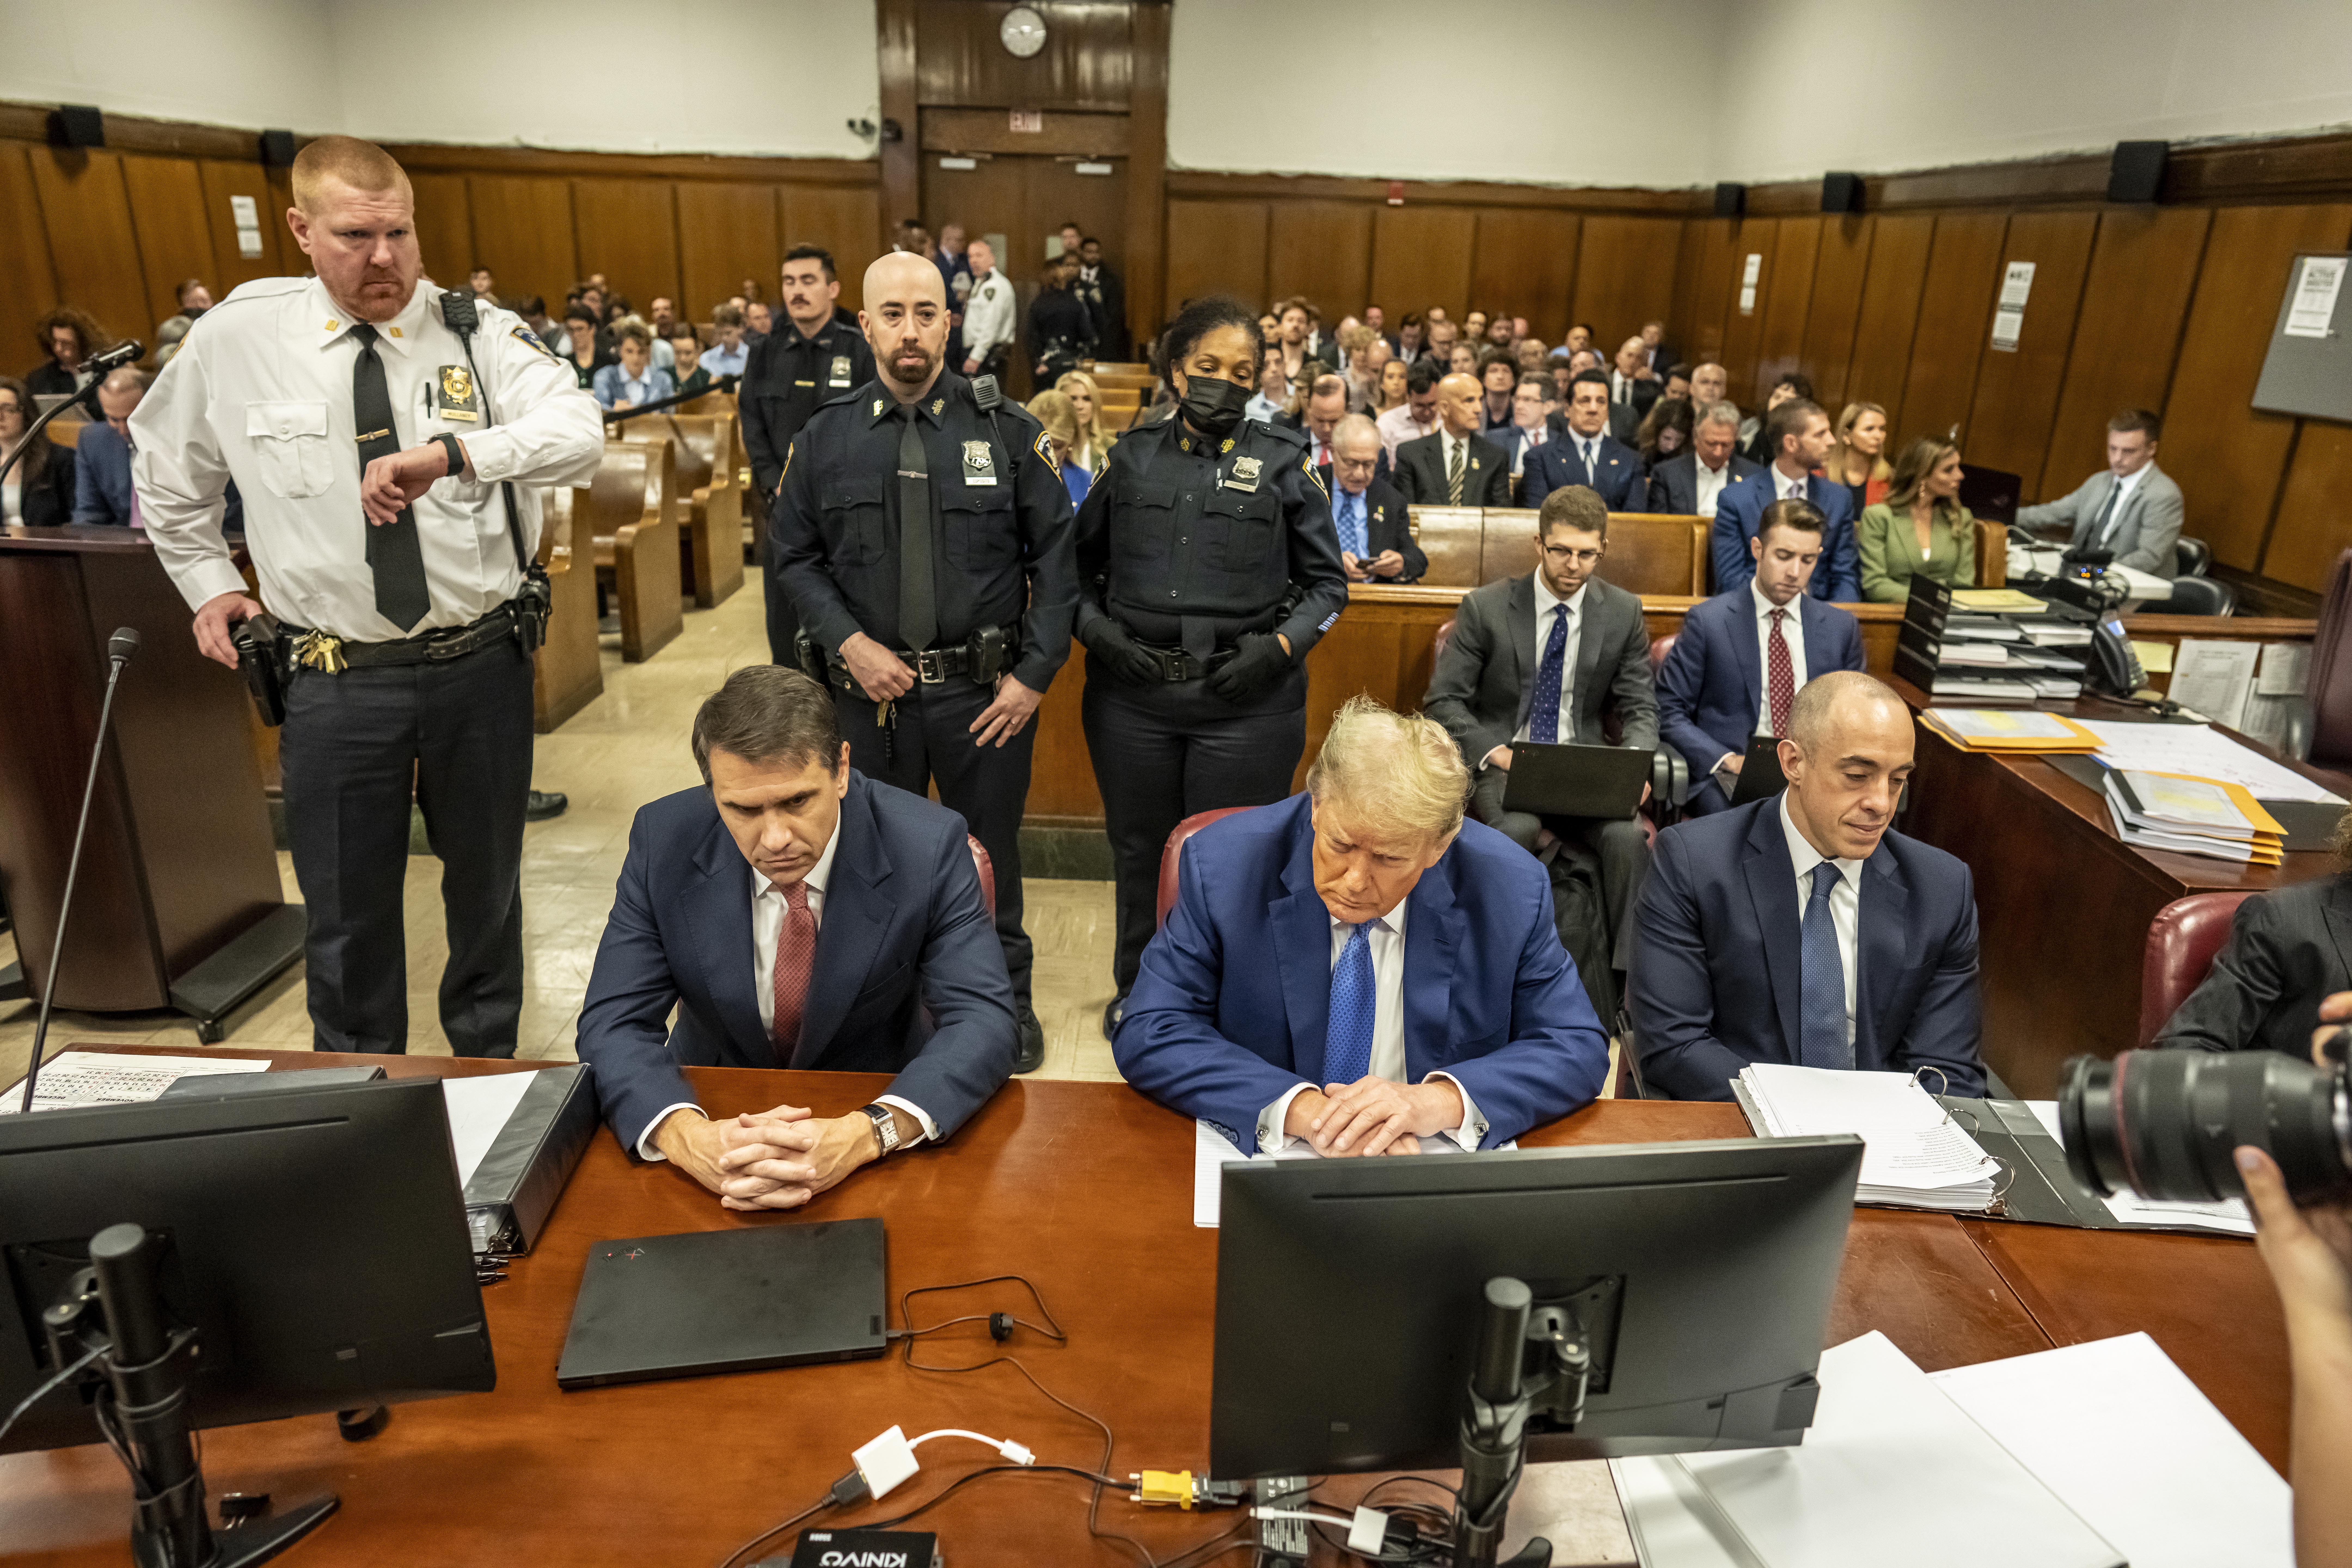 Chaos At Hush Money Trial: Judge Clears Courtroom In Irritation Over Trump Defense Witness — Update